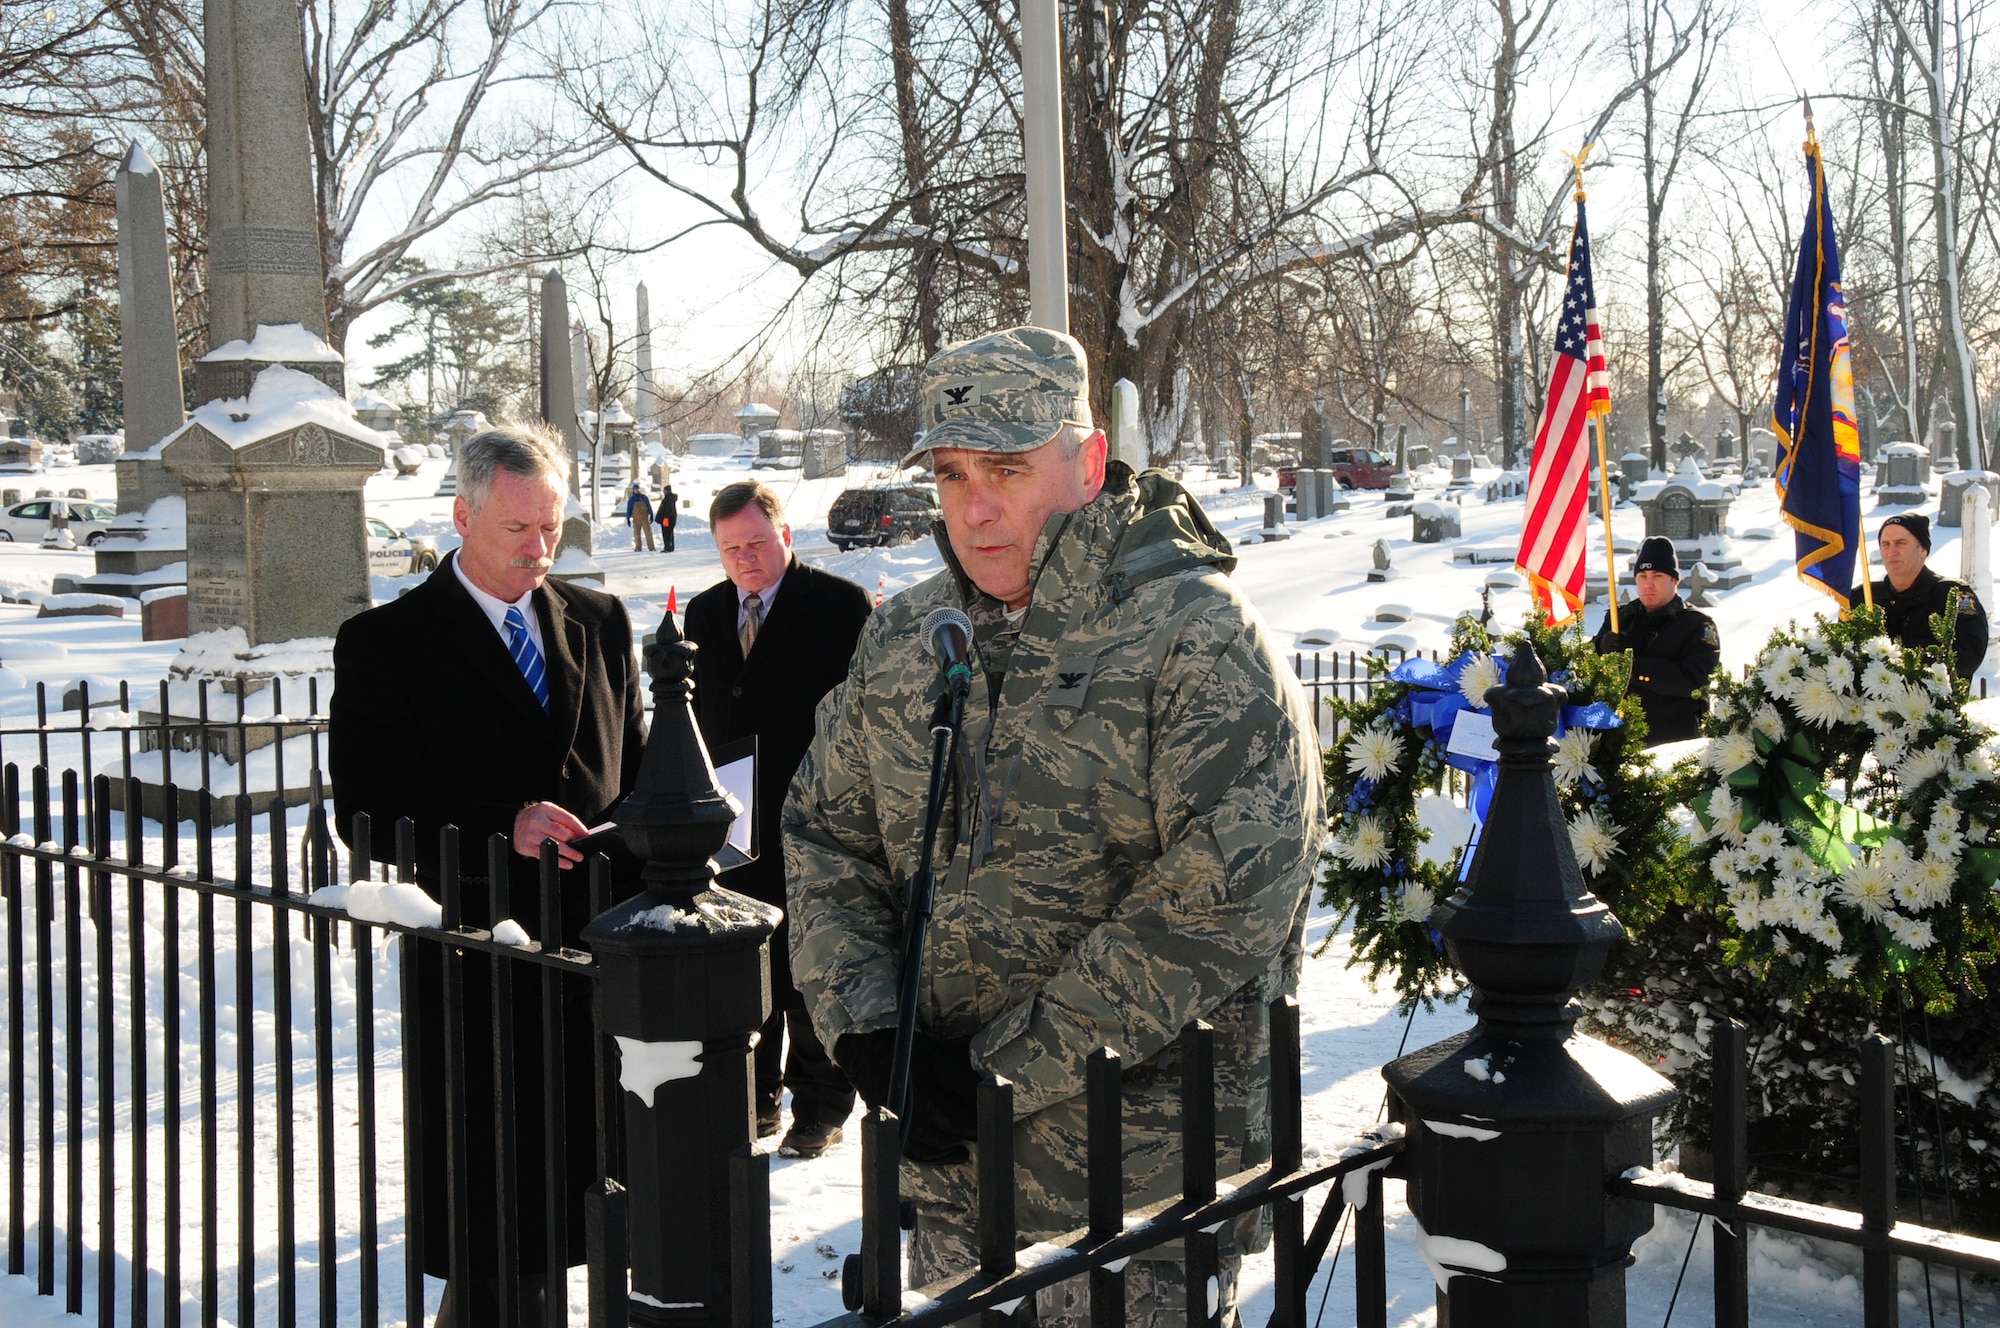 Col. John Higgins, Commander of the New York Air National Guard's 107th Airlift Wing, placed the wreath on behalf of President Barack Obama at Forest Lawn Cemetery in Buffalo, NY on January 9, 2014 (U.S. Air National Guard Photo/Senior Master Sgt. Ray Lloyd)